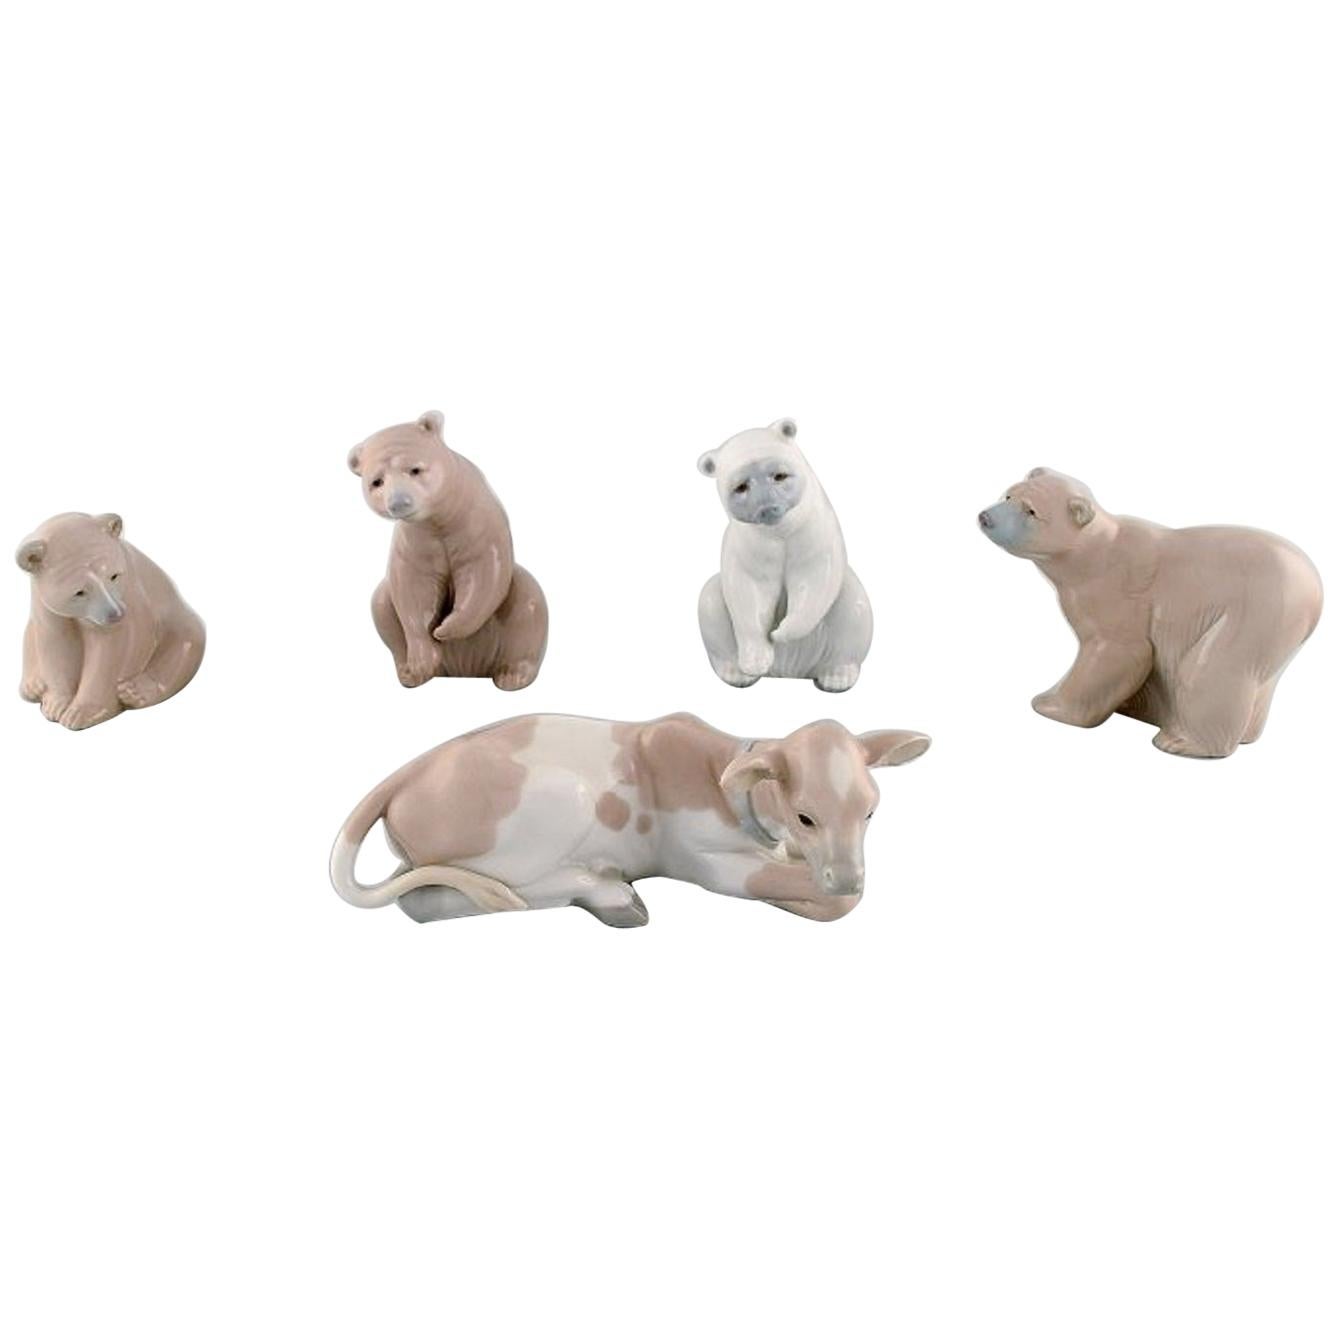 Lladro, Spain, Five Porcelain Figurines, Four Bears and a Calf, 1980s-1990s